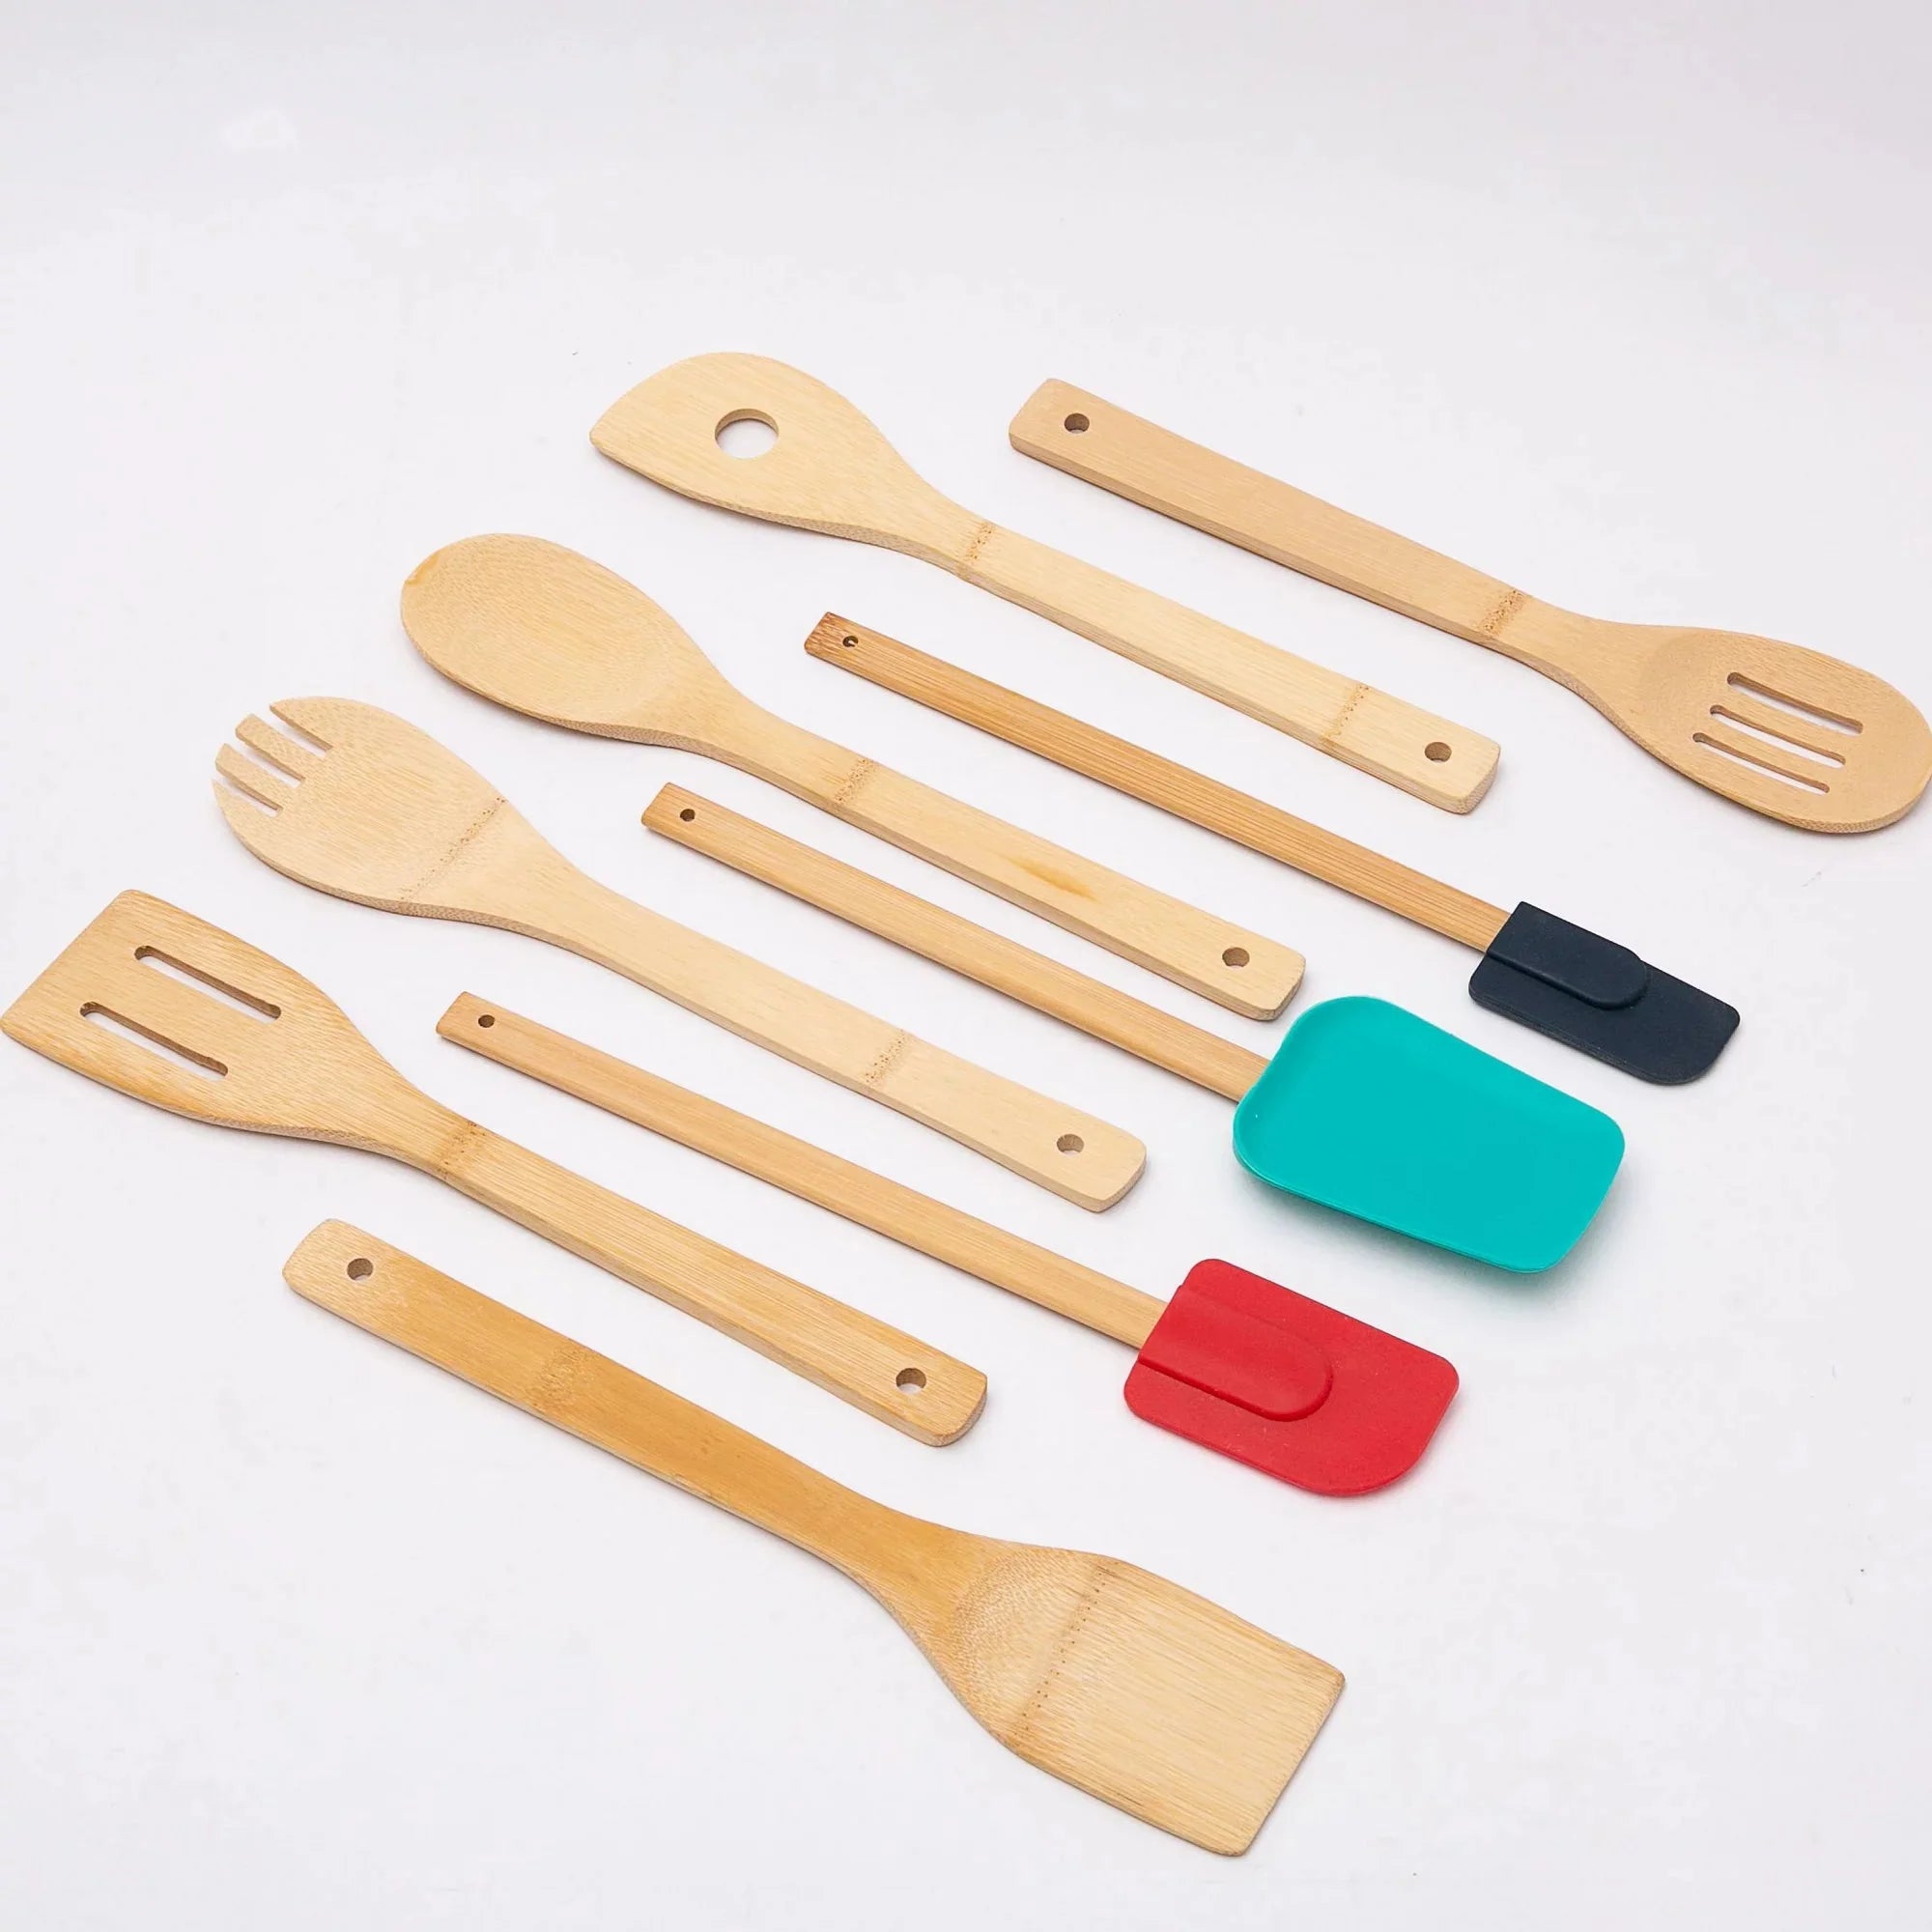 Wholesale prices with free shipping all over United States Mainstays 100% Natural Bamboo Tool and Gadgets 9 Pieces Utensil Set for Cooking - Steven Deals